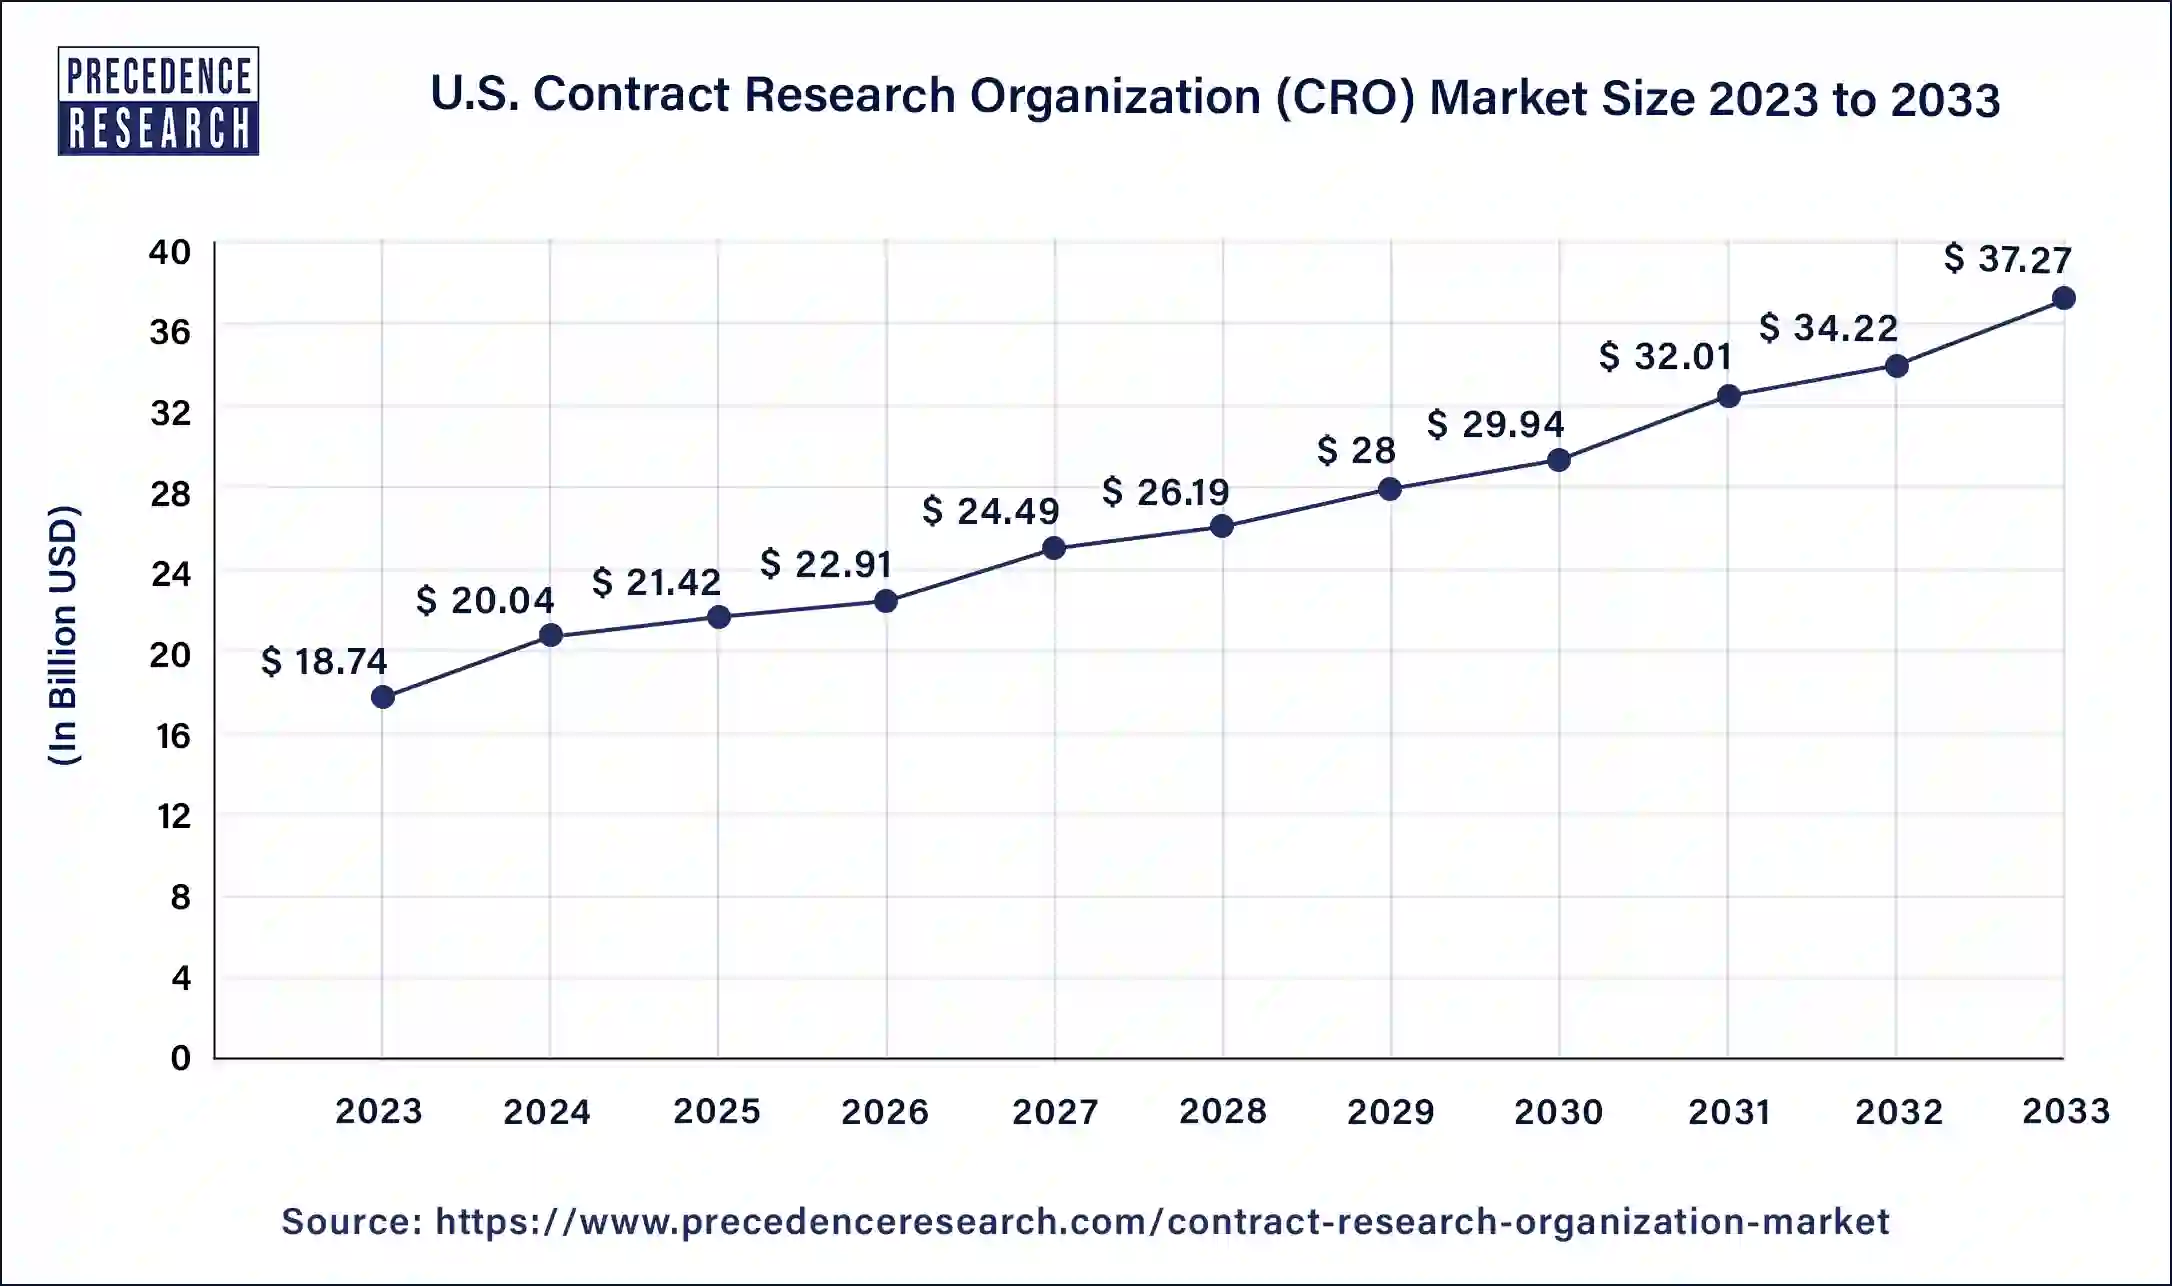 U.S. Contract Research Organization (CRO) Market Size 2024 to 2033